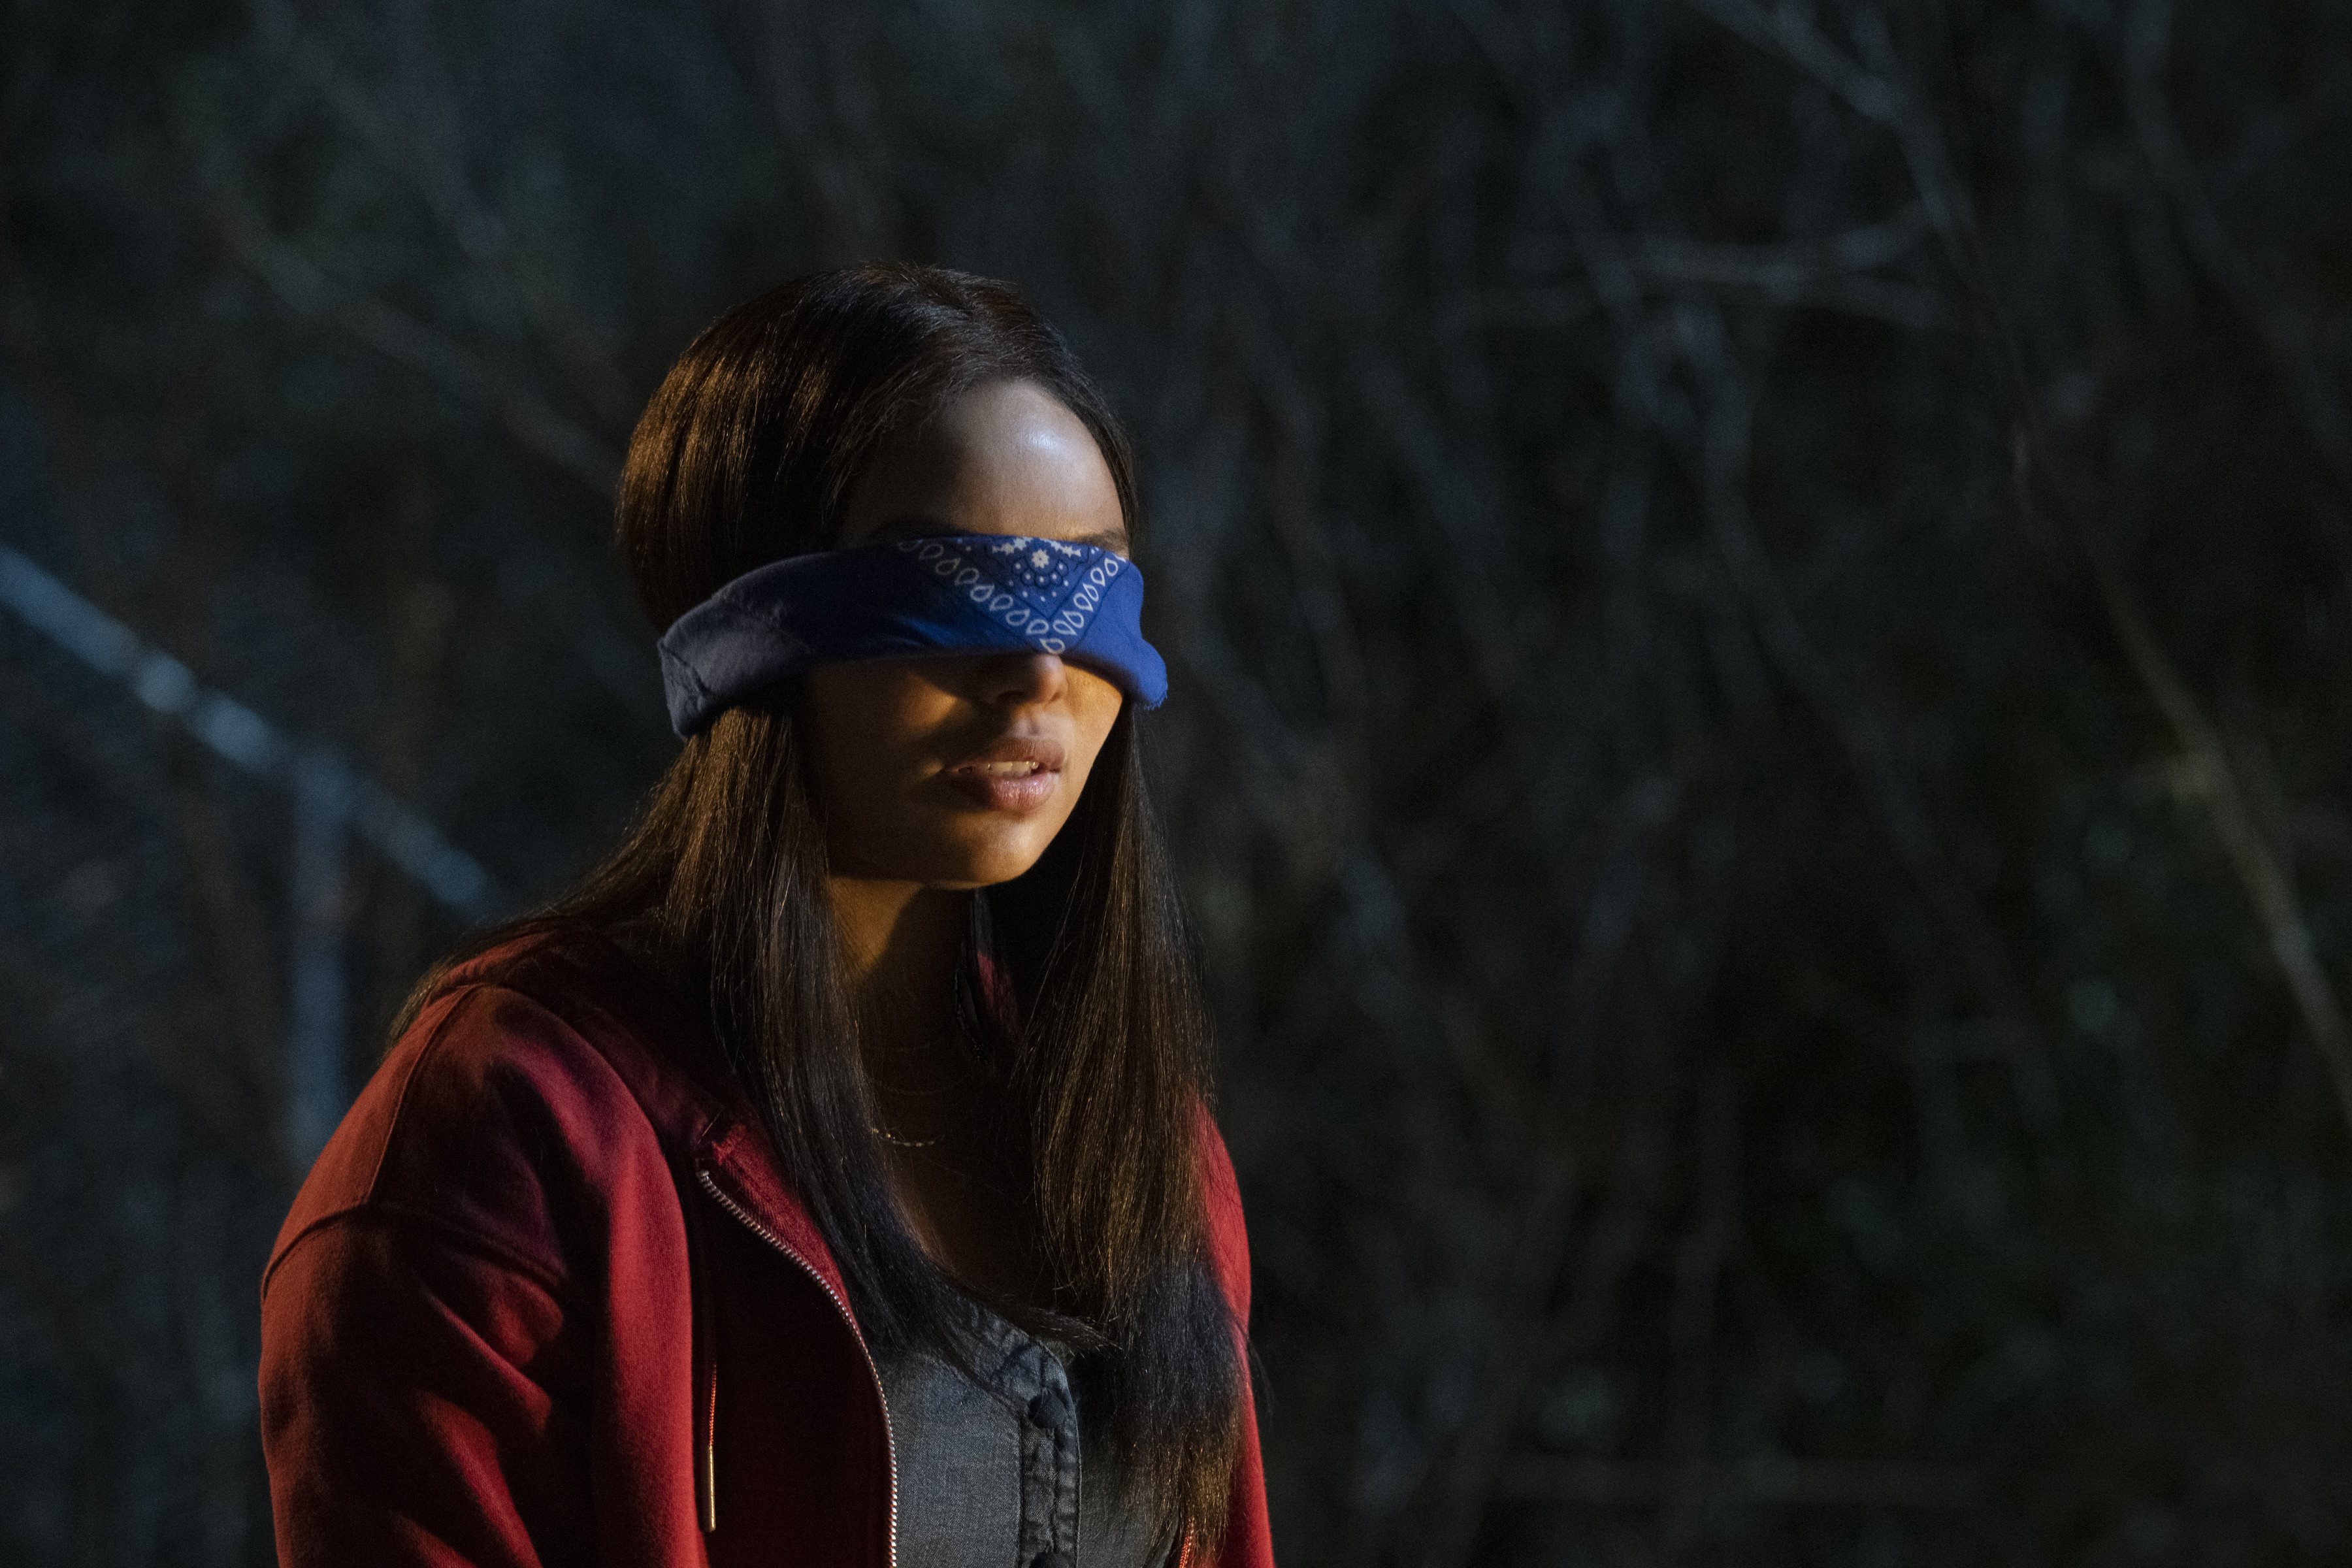 A long-haired teenage girl in a red jacket and bright blue bandana blindfold in Panic